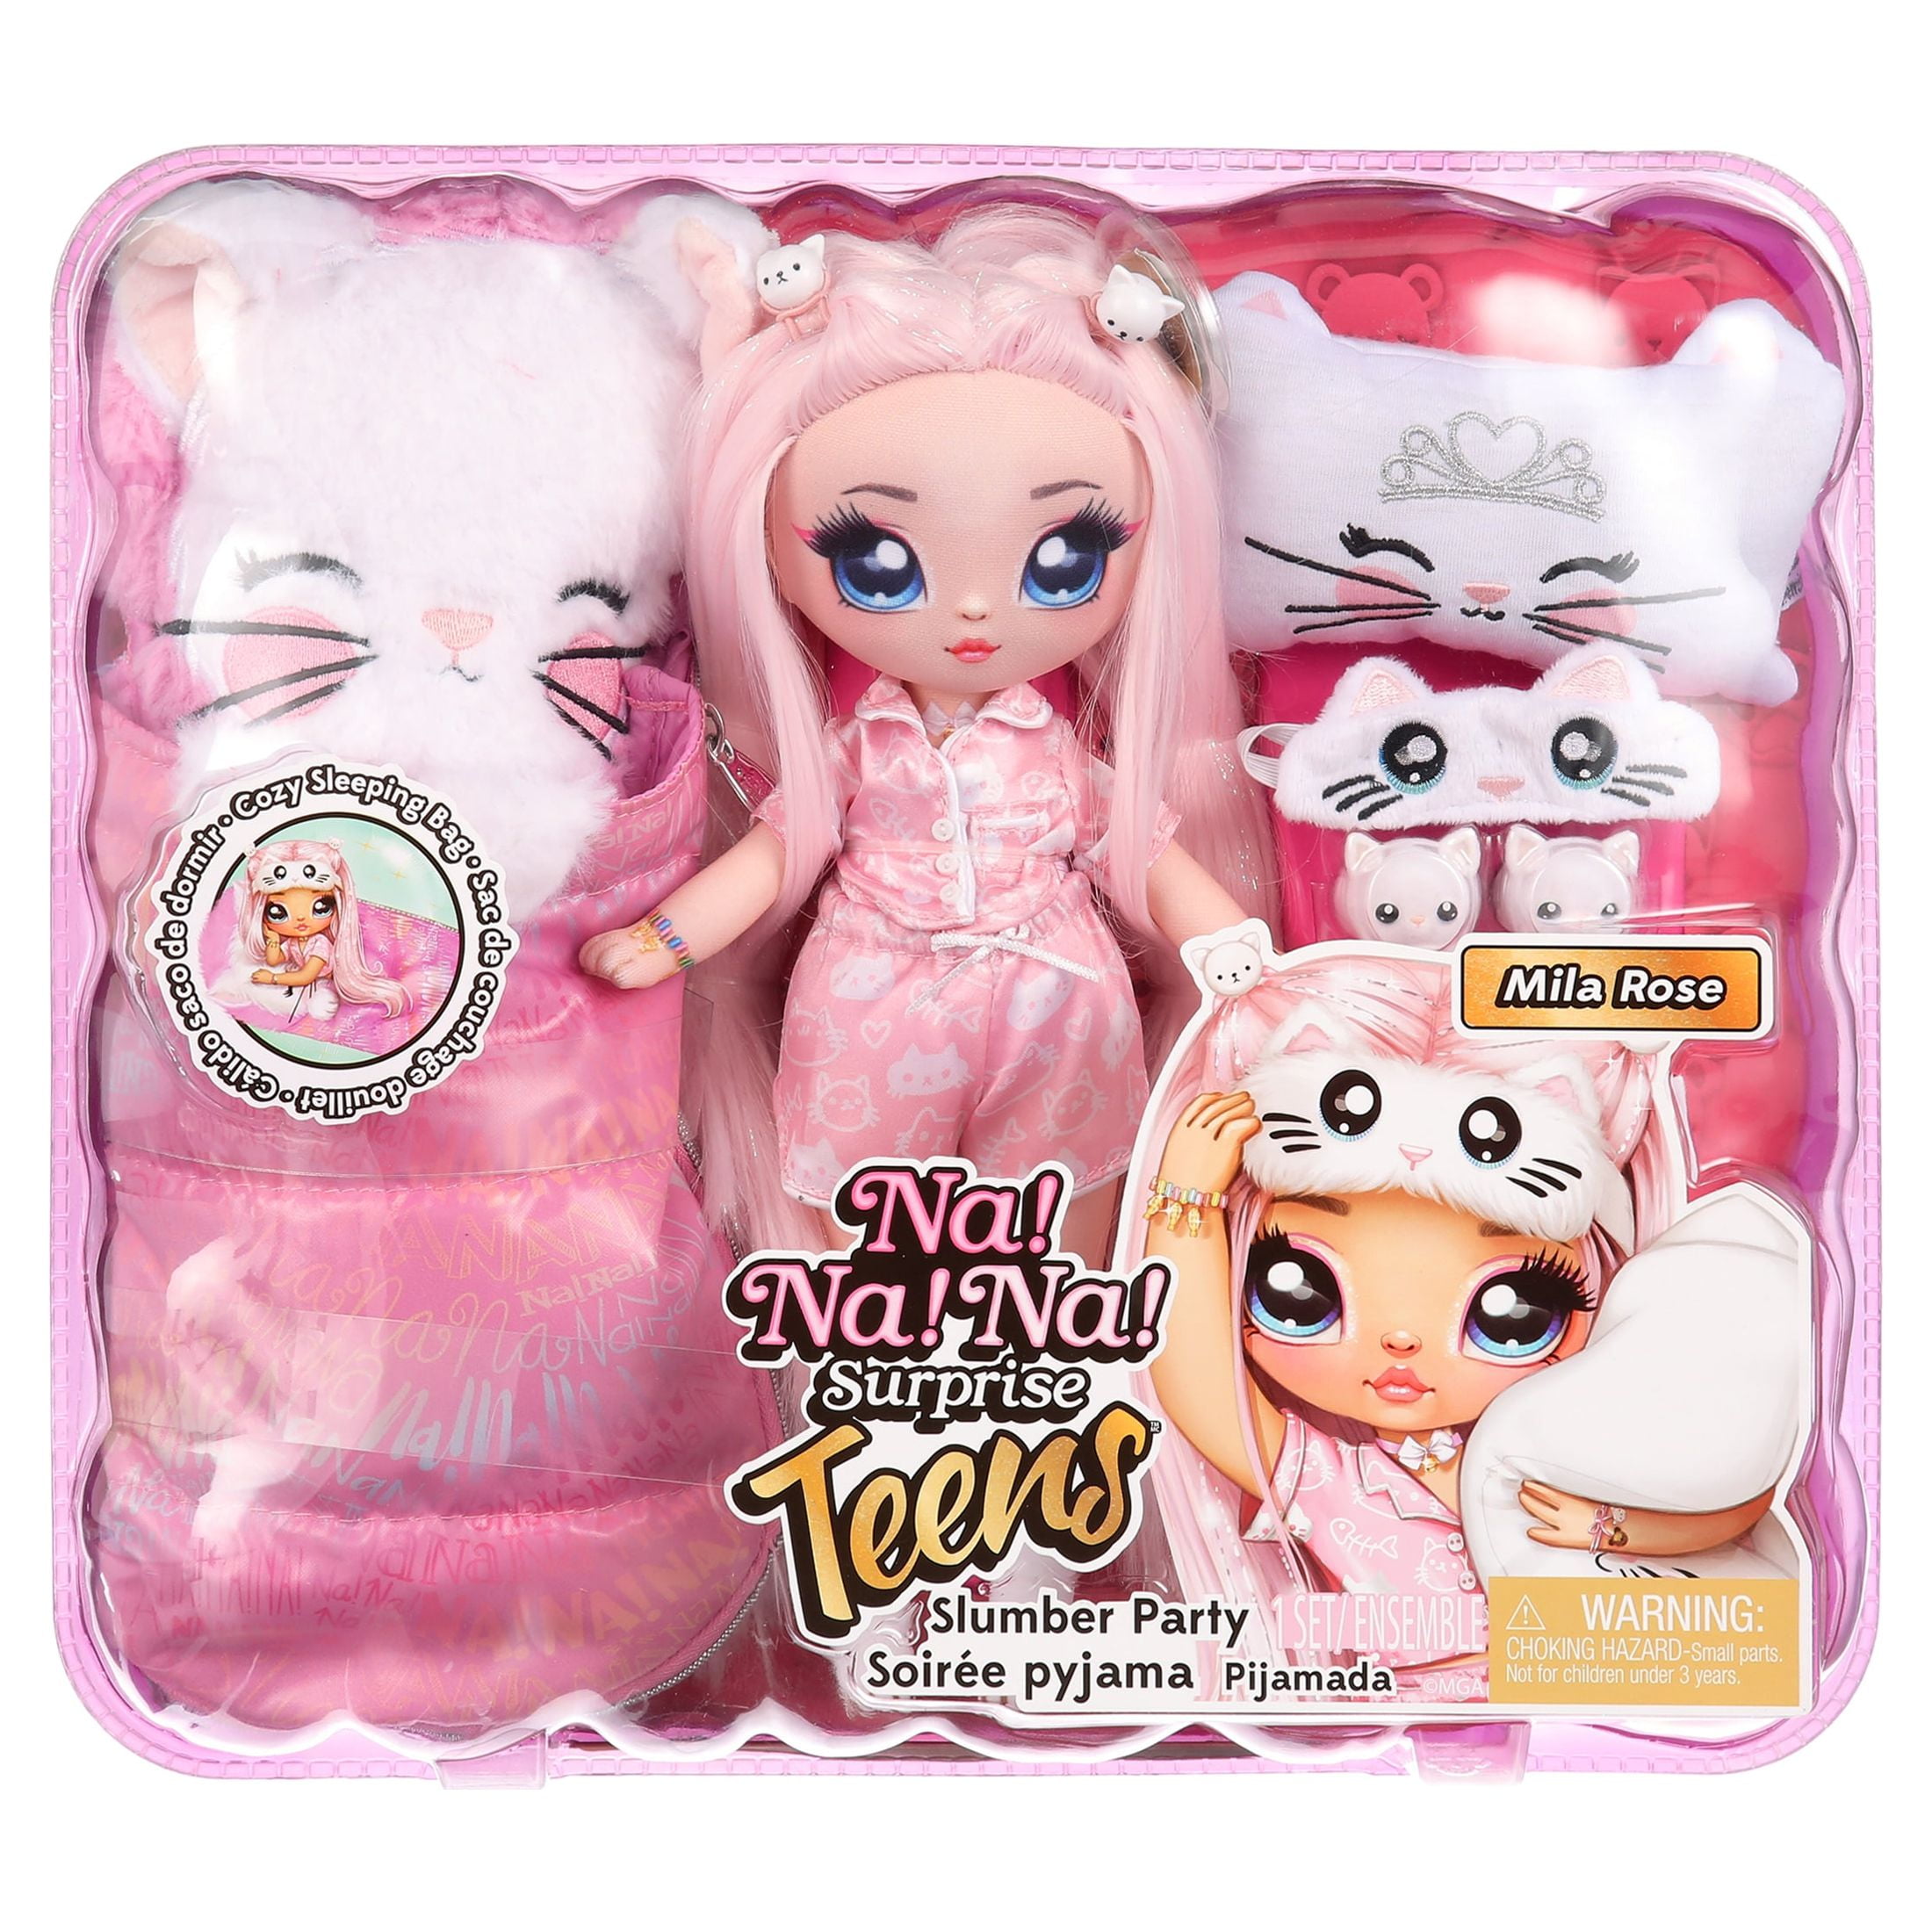 Na! Surprise Minis Series 1-4'' Fashion Doll Mystery Packaging with Confetti Surprise